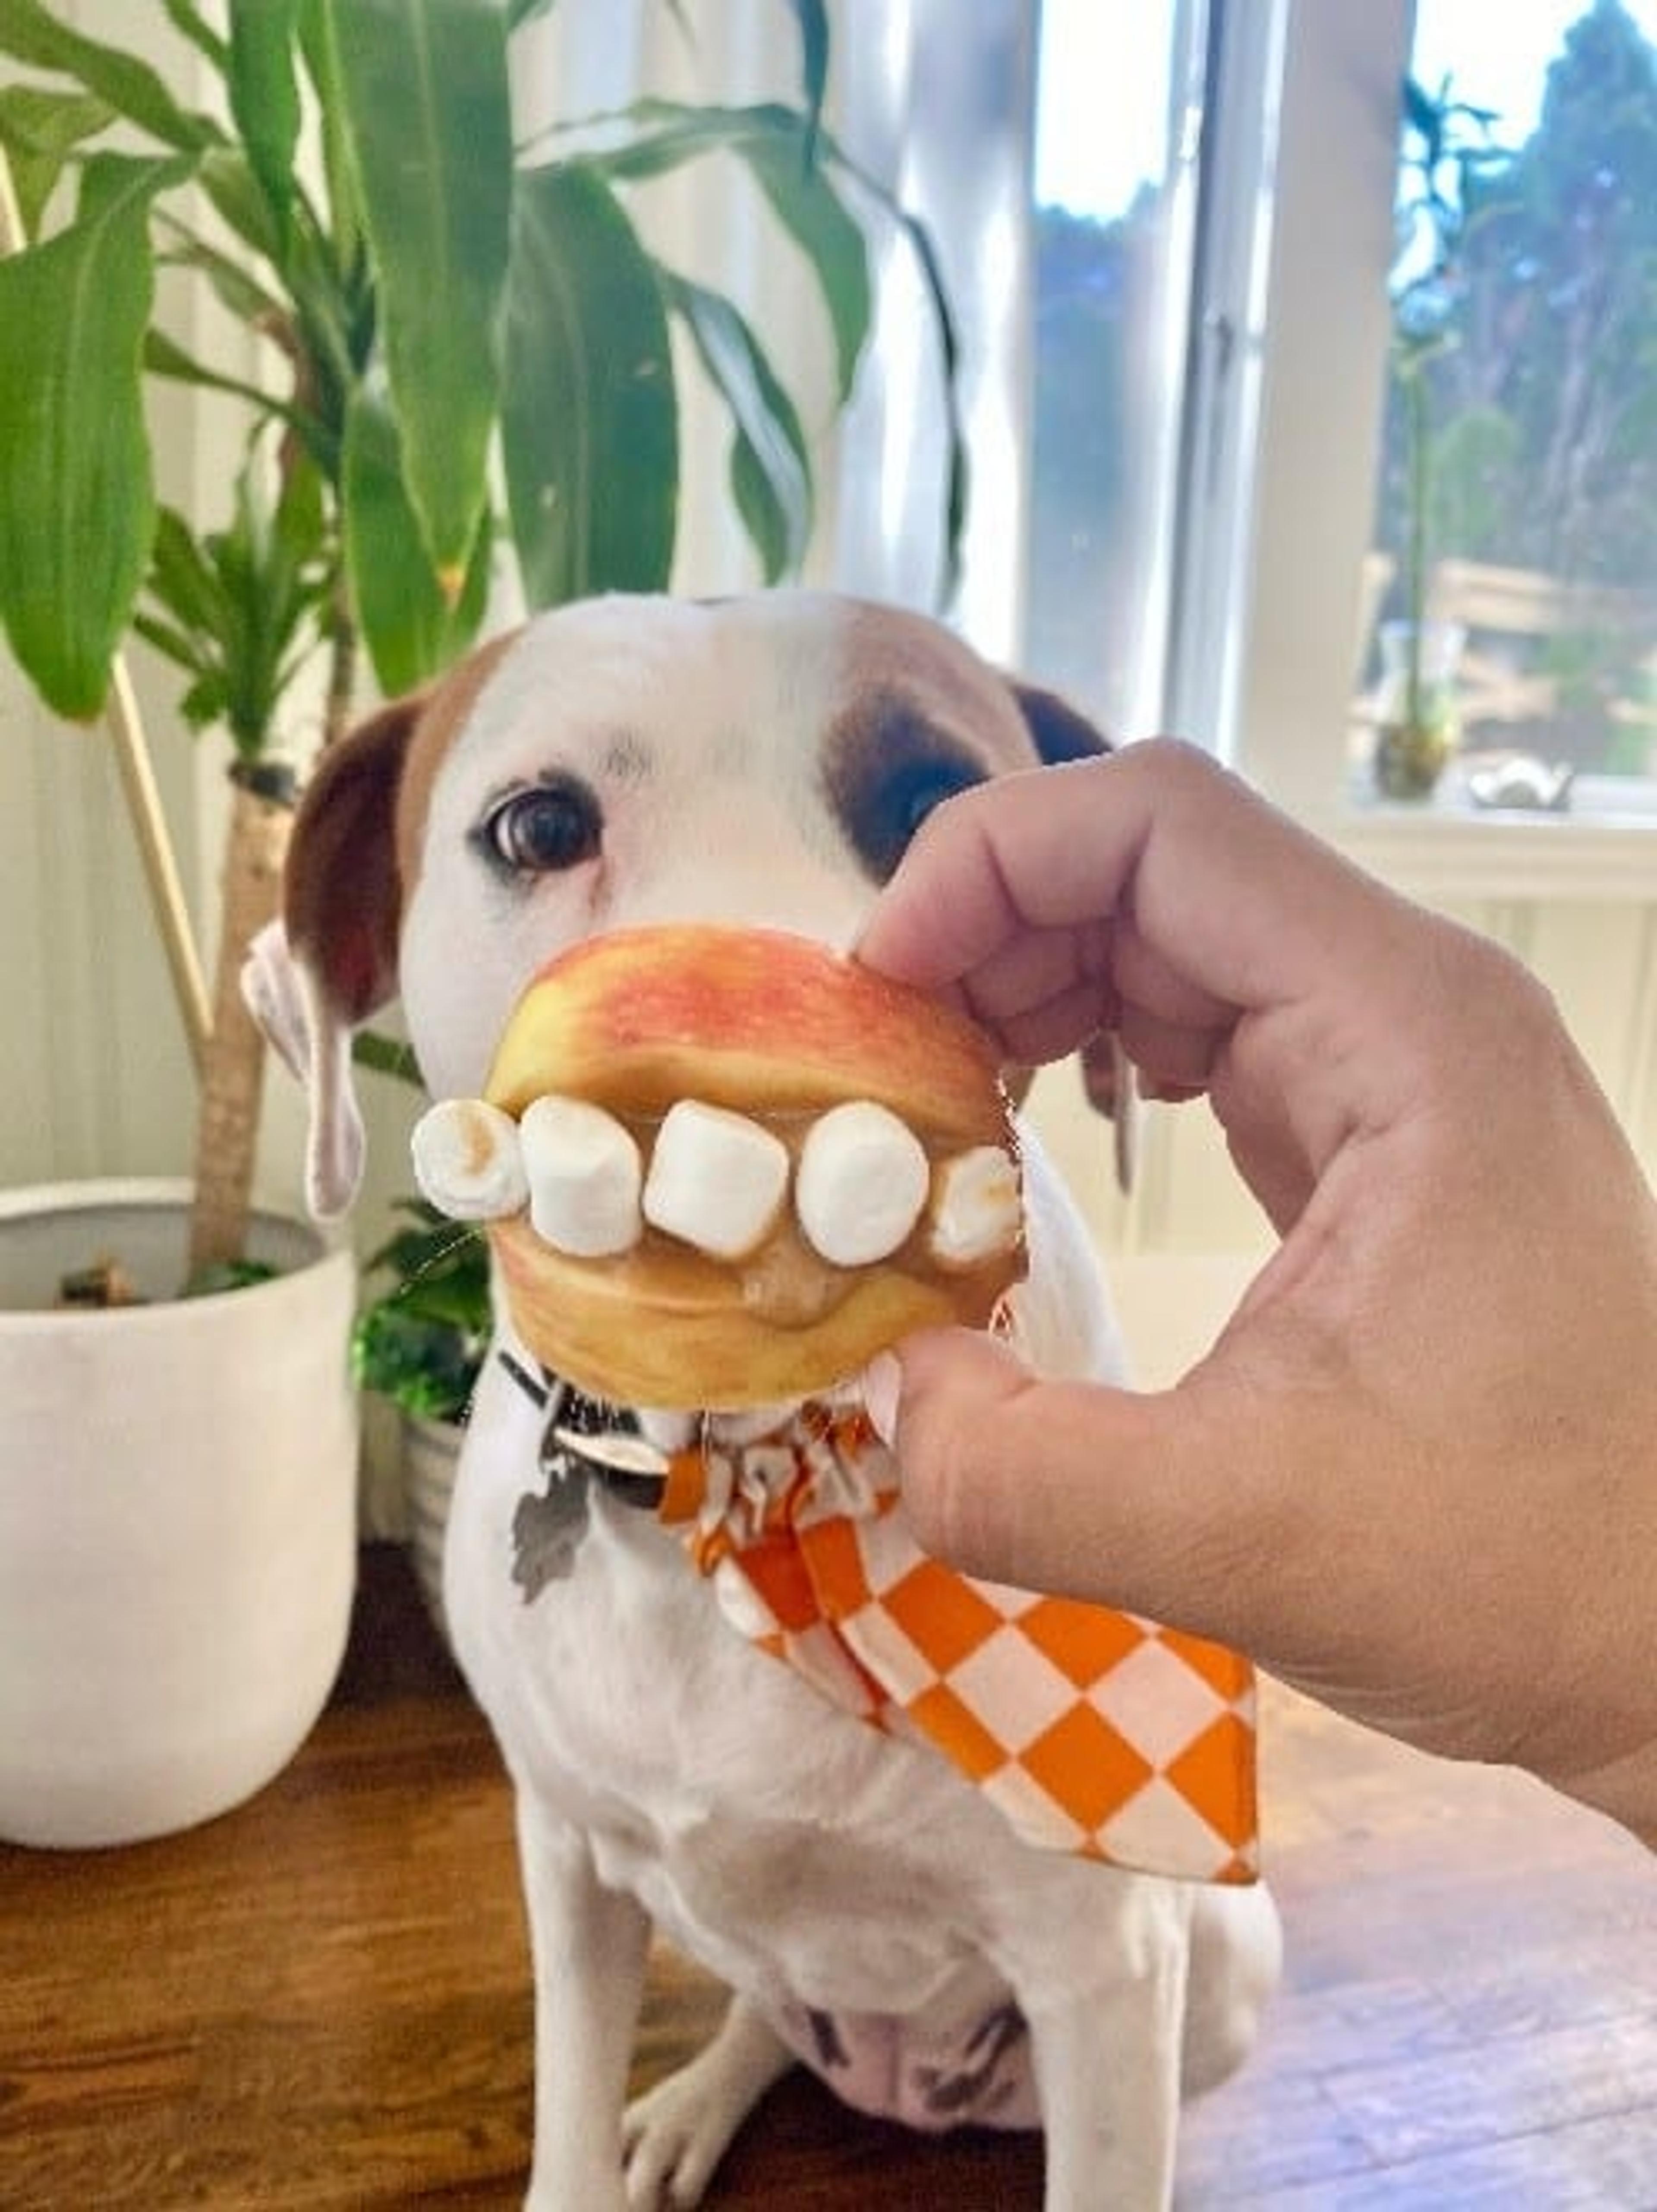 Apple with marshmallow teeth being held in front of a dog's mouth